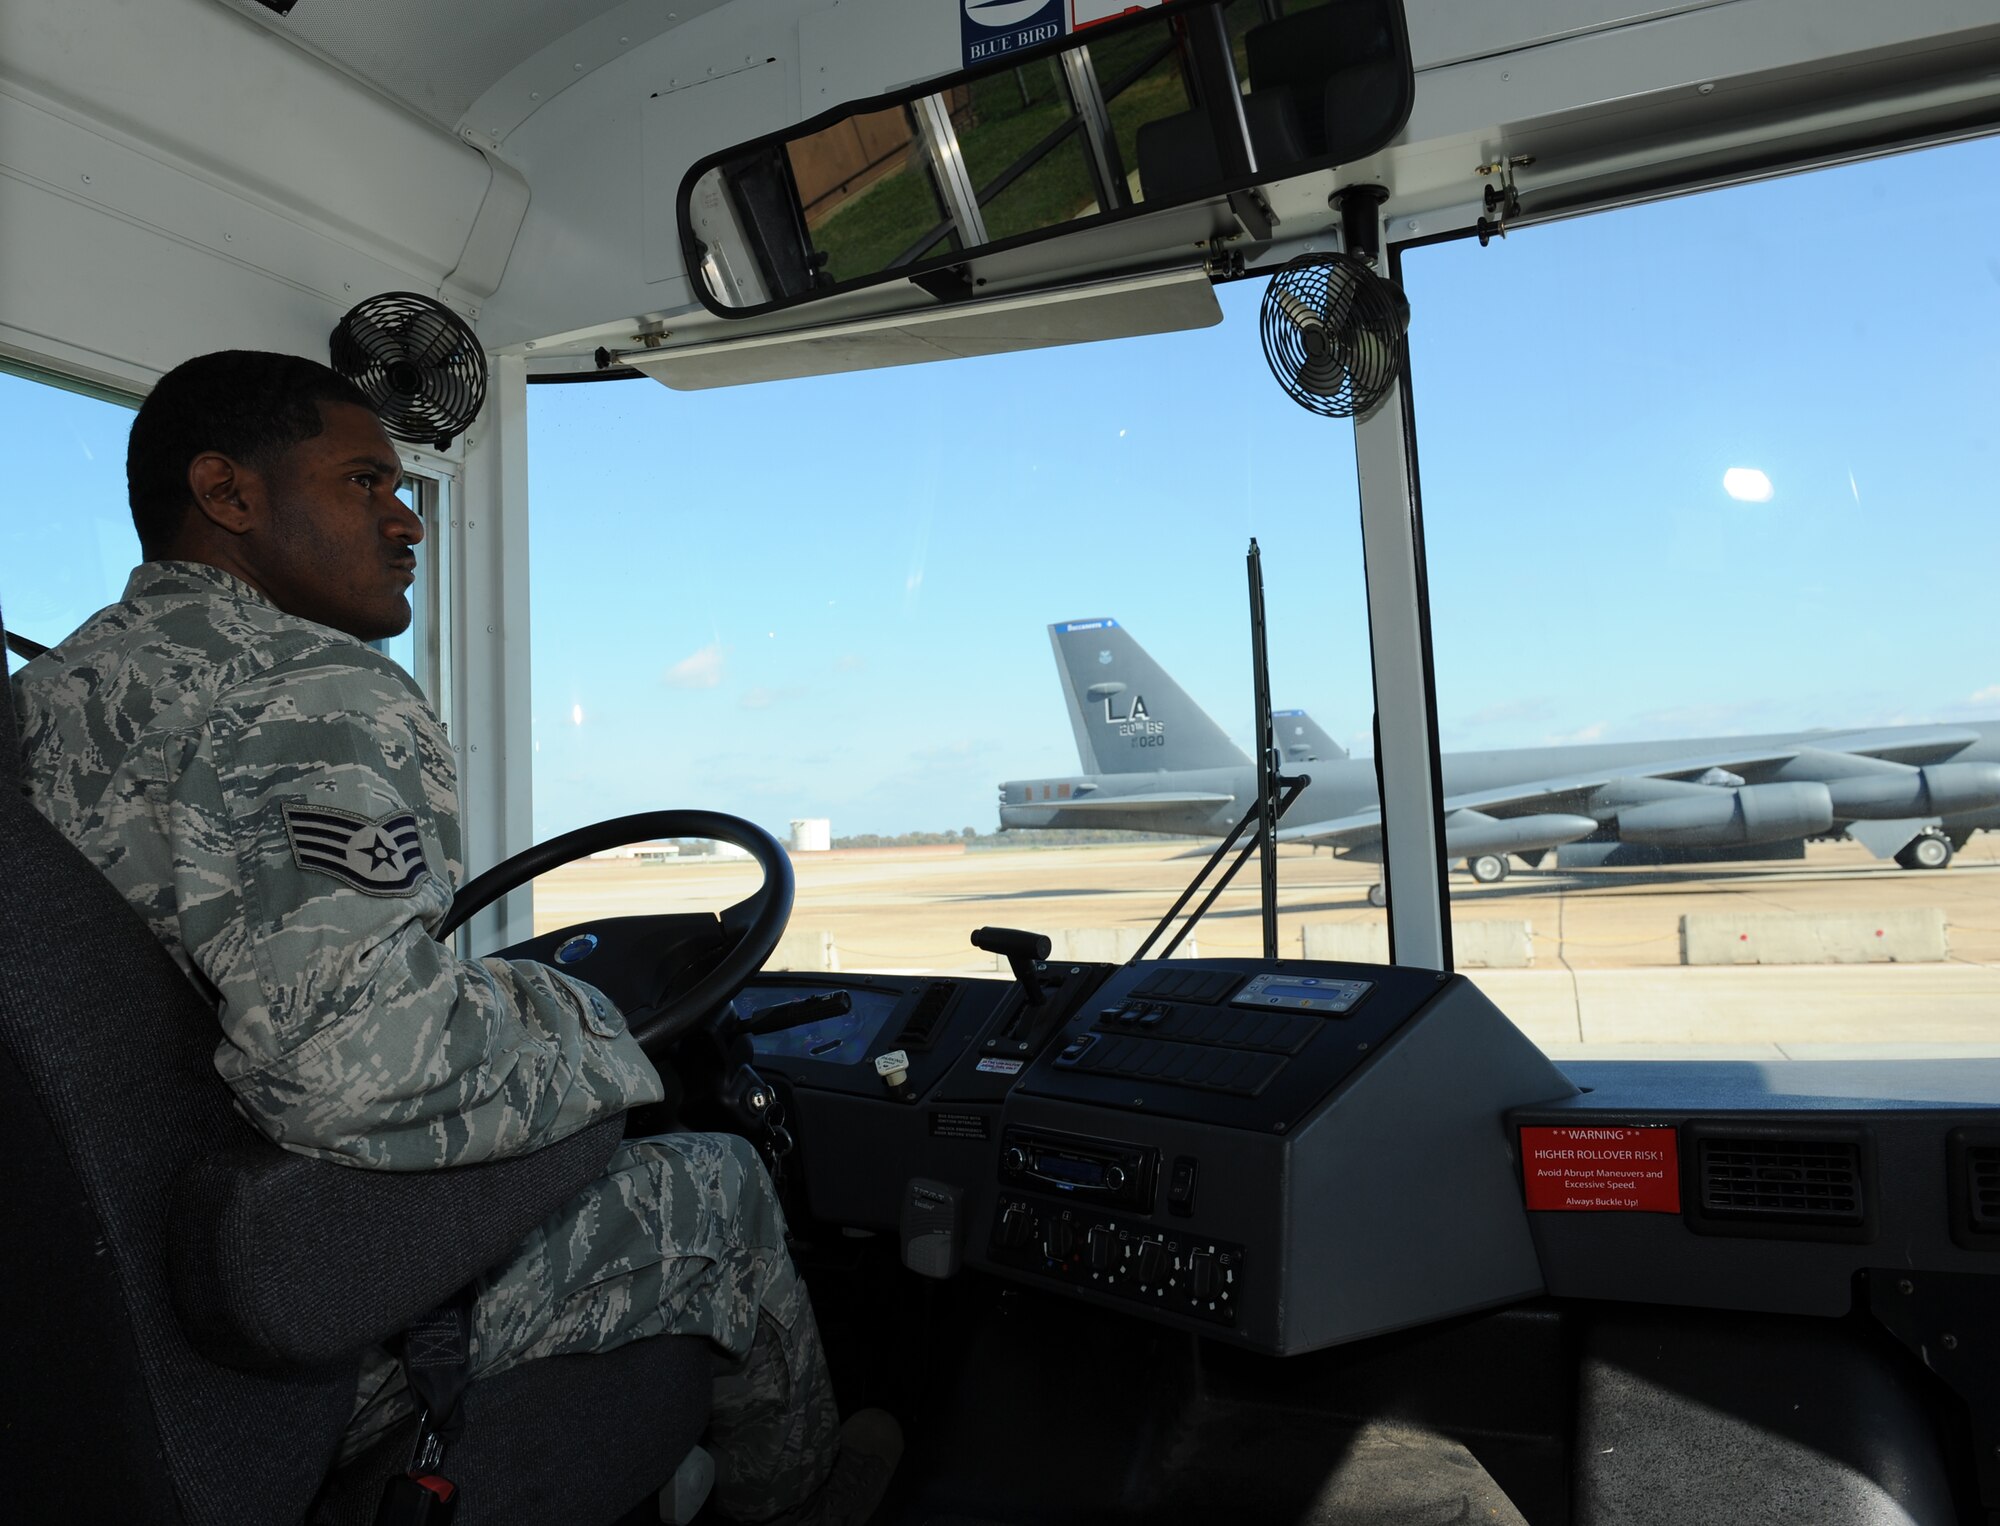 Staff Sgt. Anthony Jones Jr., 2nd Logistics Readiness Squadron Vehicle Operations craftsman, drives a bus on the flightline on Barksdale Air Force Base, La., Nov. 6. Vehicle operators drive high-ranking individuals from the Air Force and its sister services, as well as foreign dignitaries and groups touring the base. (U.S. Air Force photo/Airman 1st Class Benjamin Gonsier)(RELEASED)